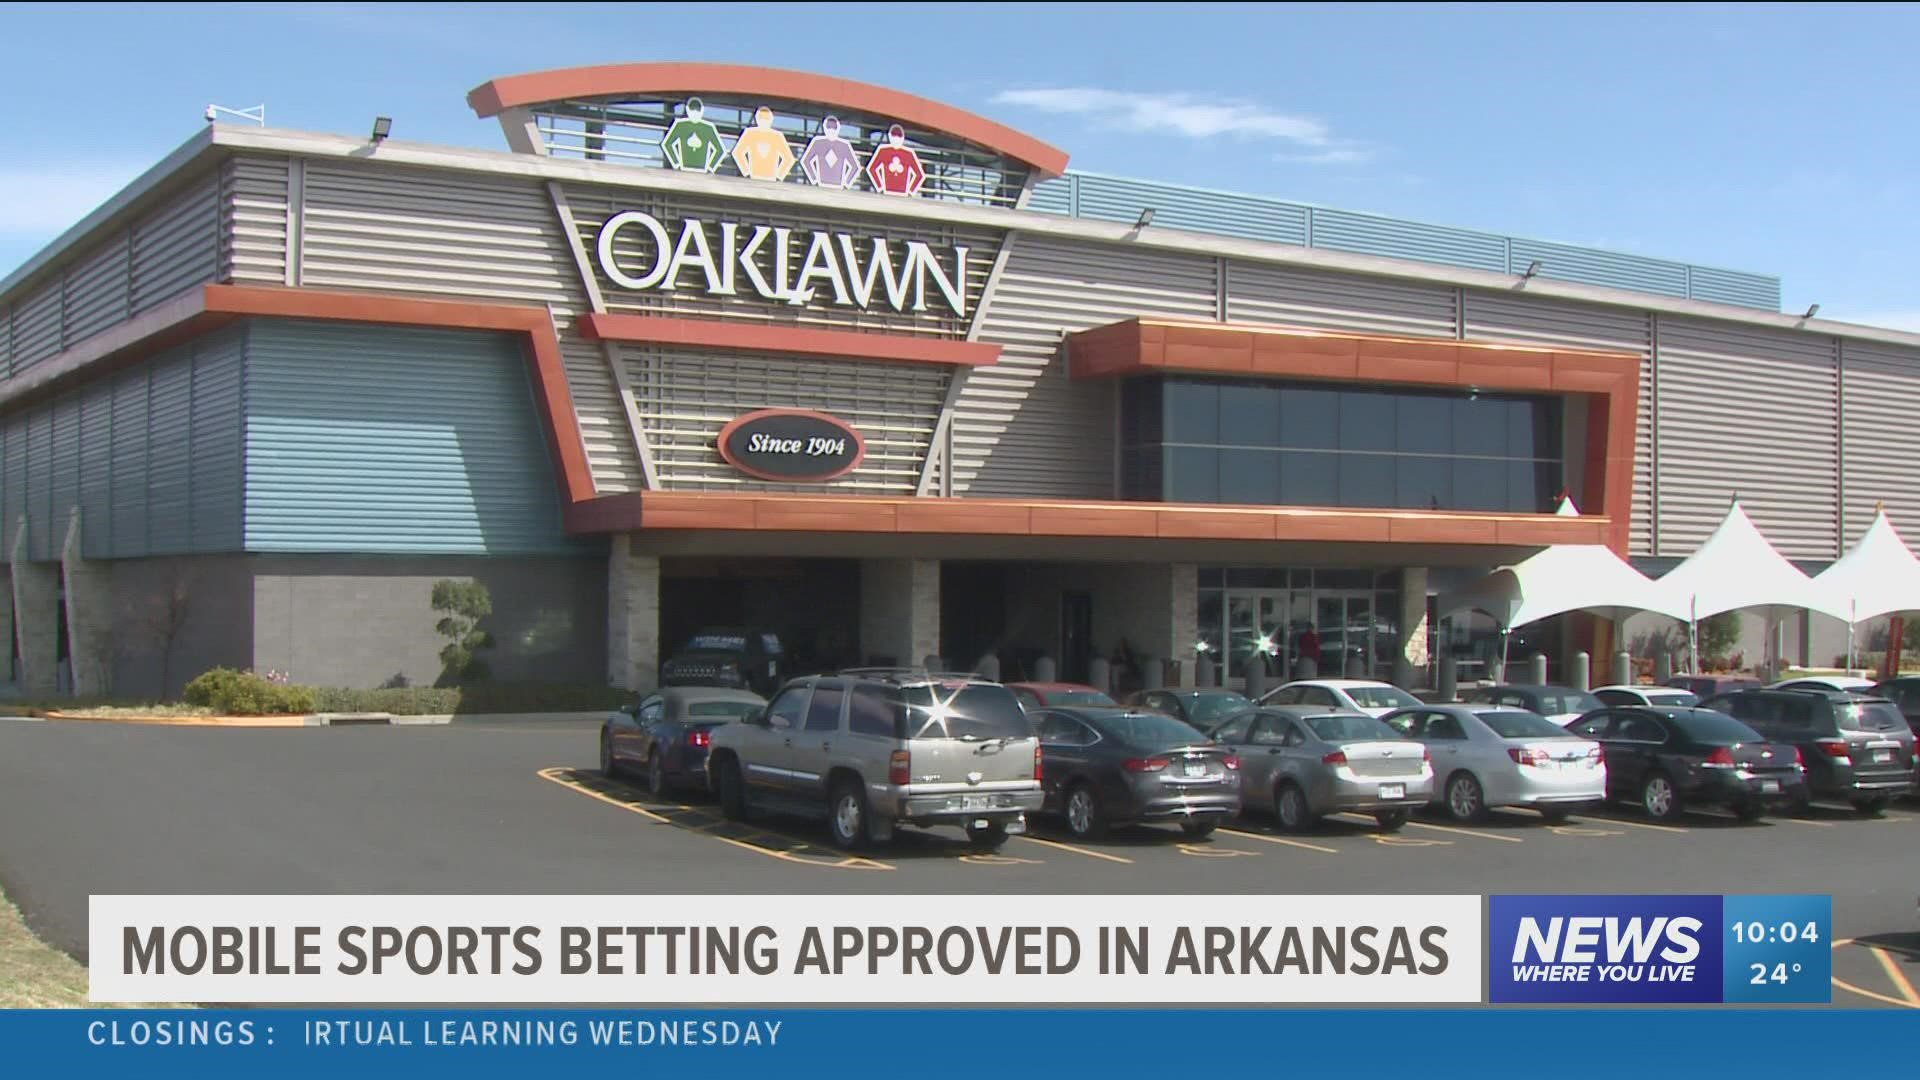 You will soon be able to make sports bets, with just your phone. Arkansas lawmakers approved the proposal just in time for March Madness.